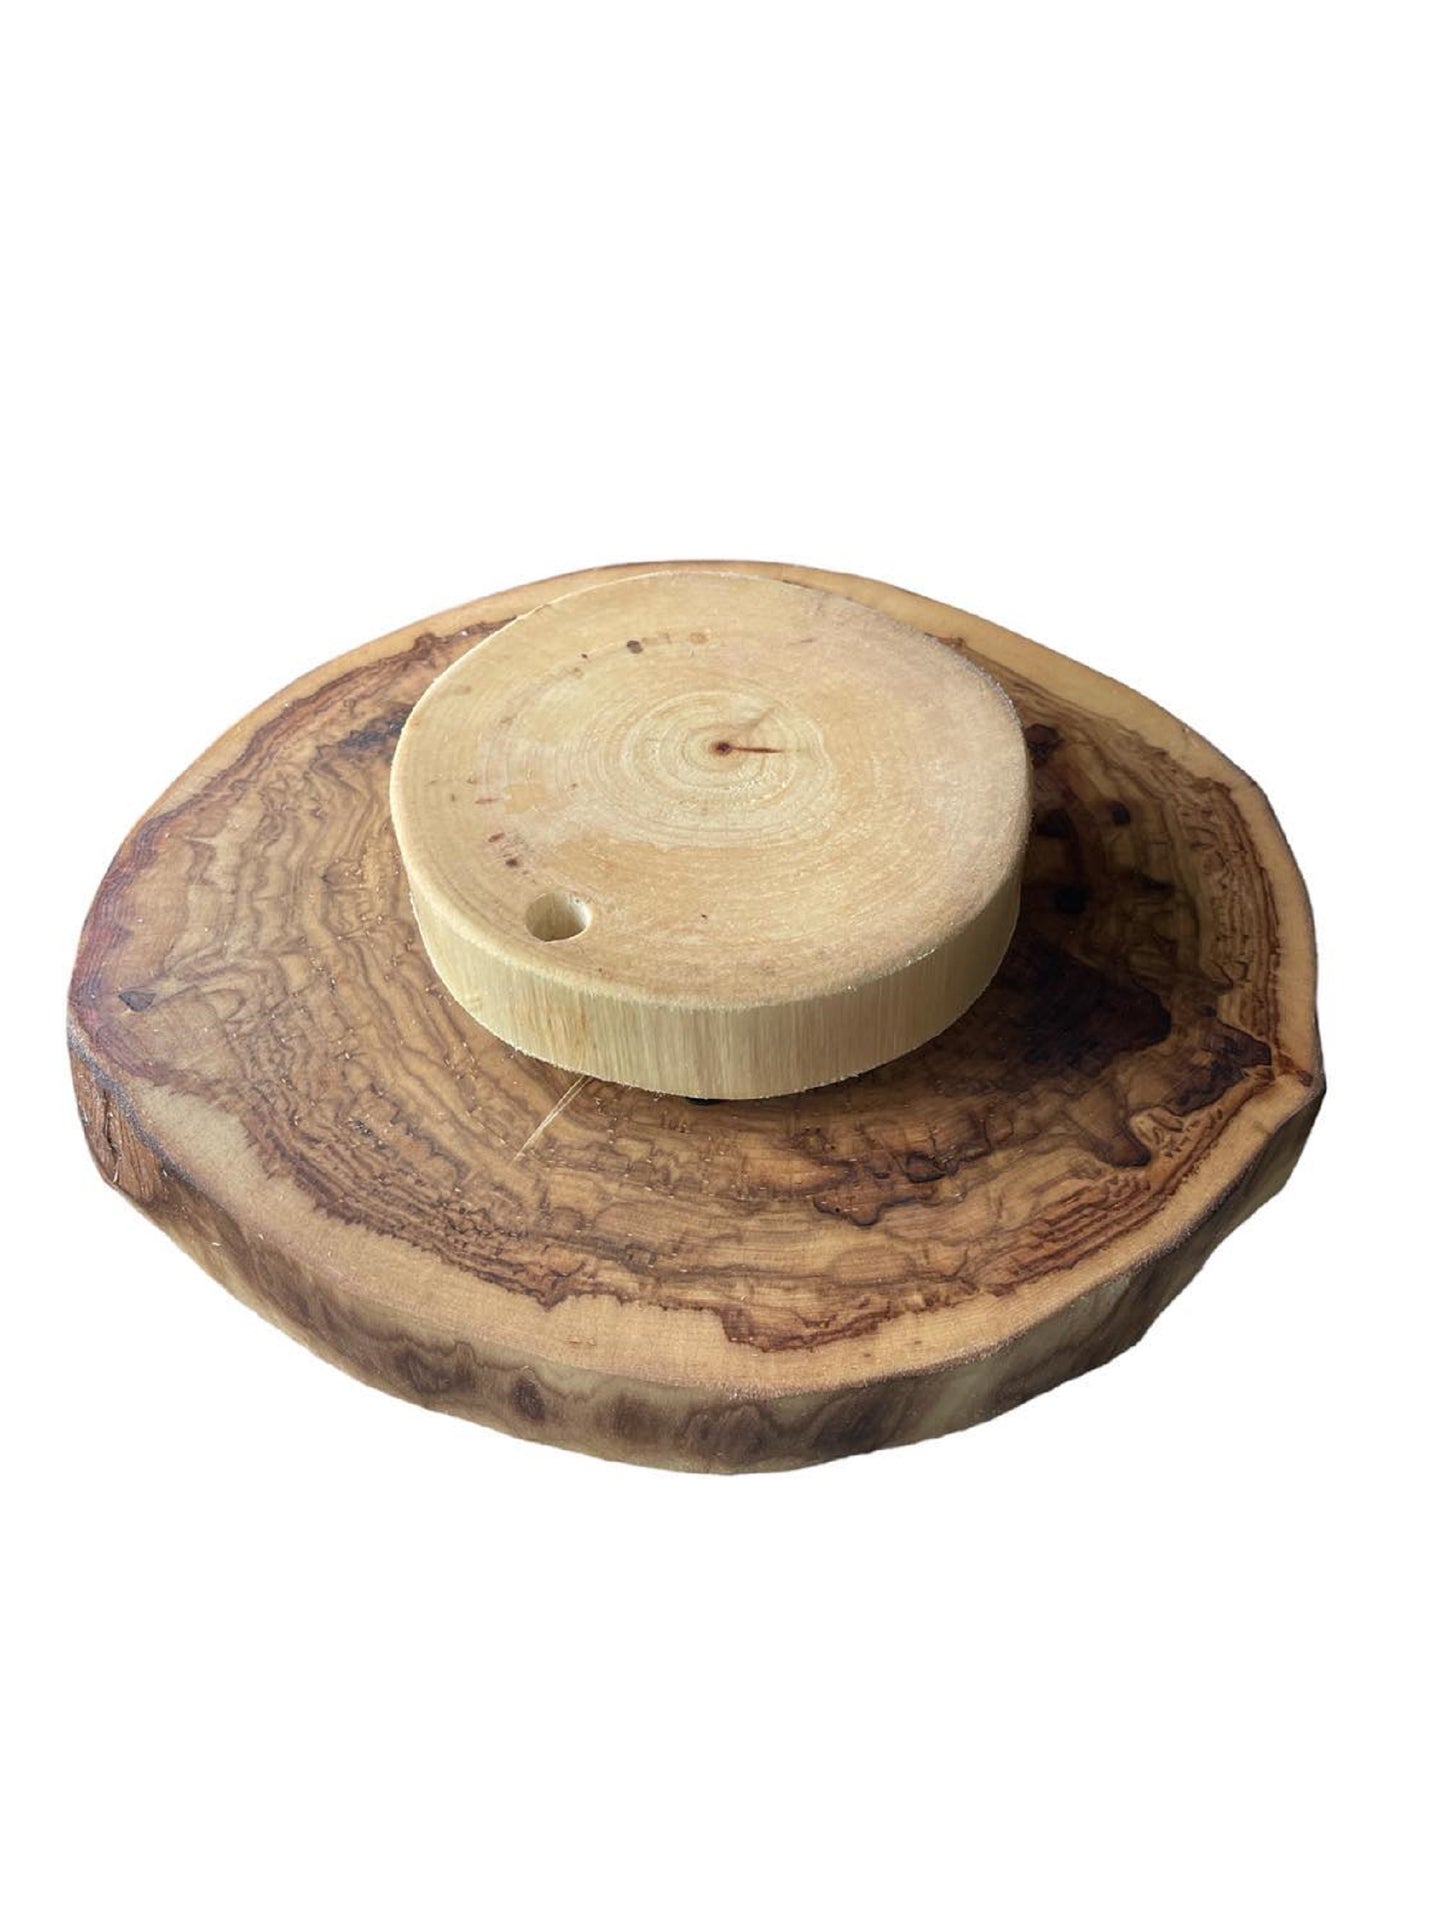 Rustic Lazy Susan Hand Crafted with Log Slices No Bark Turn Table